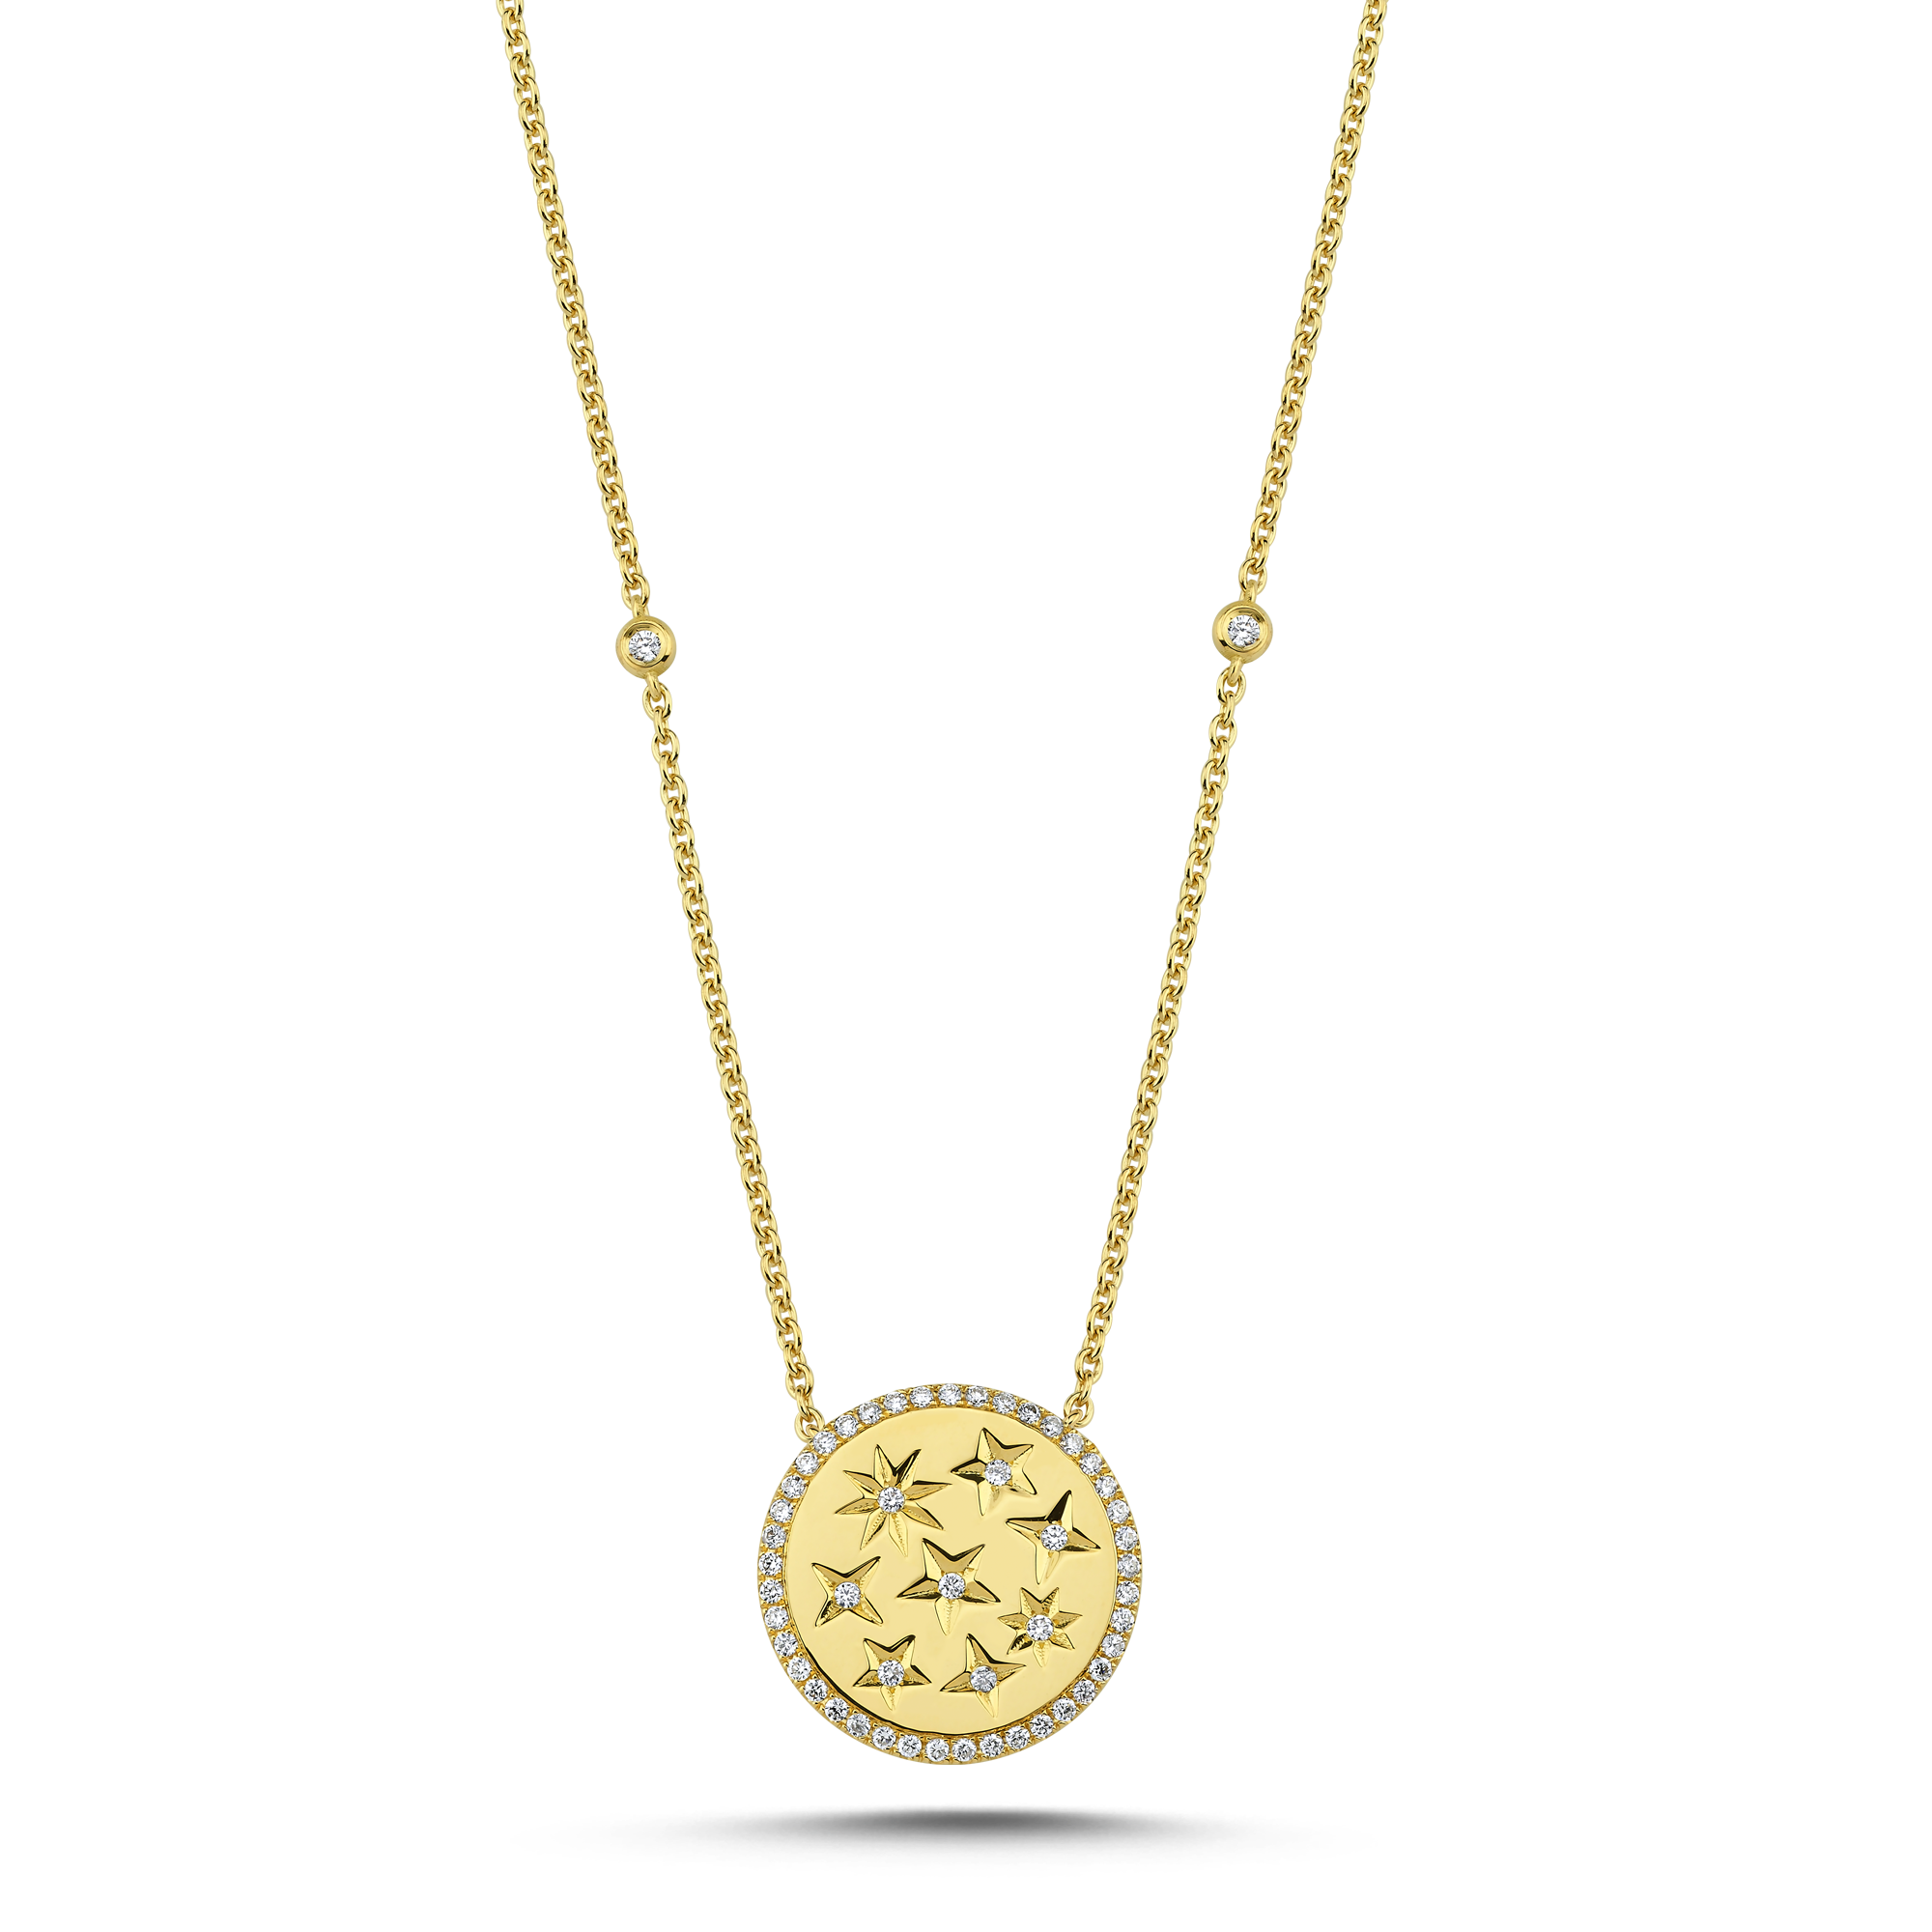 GOLDEN HOUR PENDANT WITH PAVE